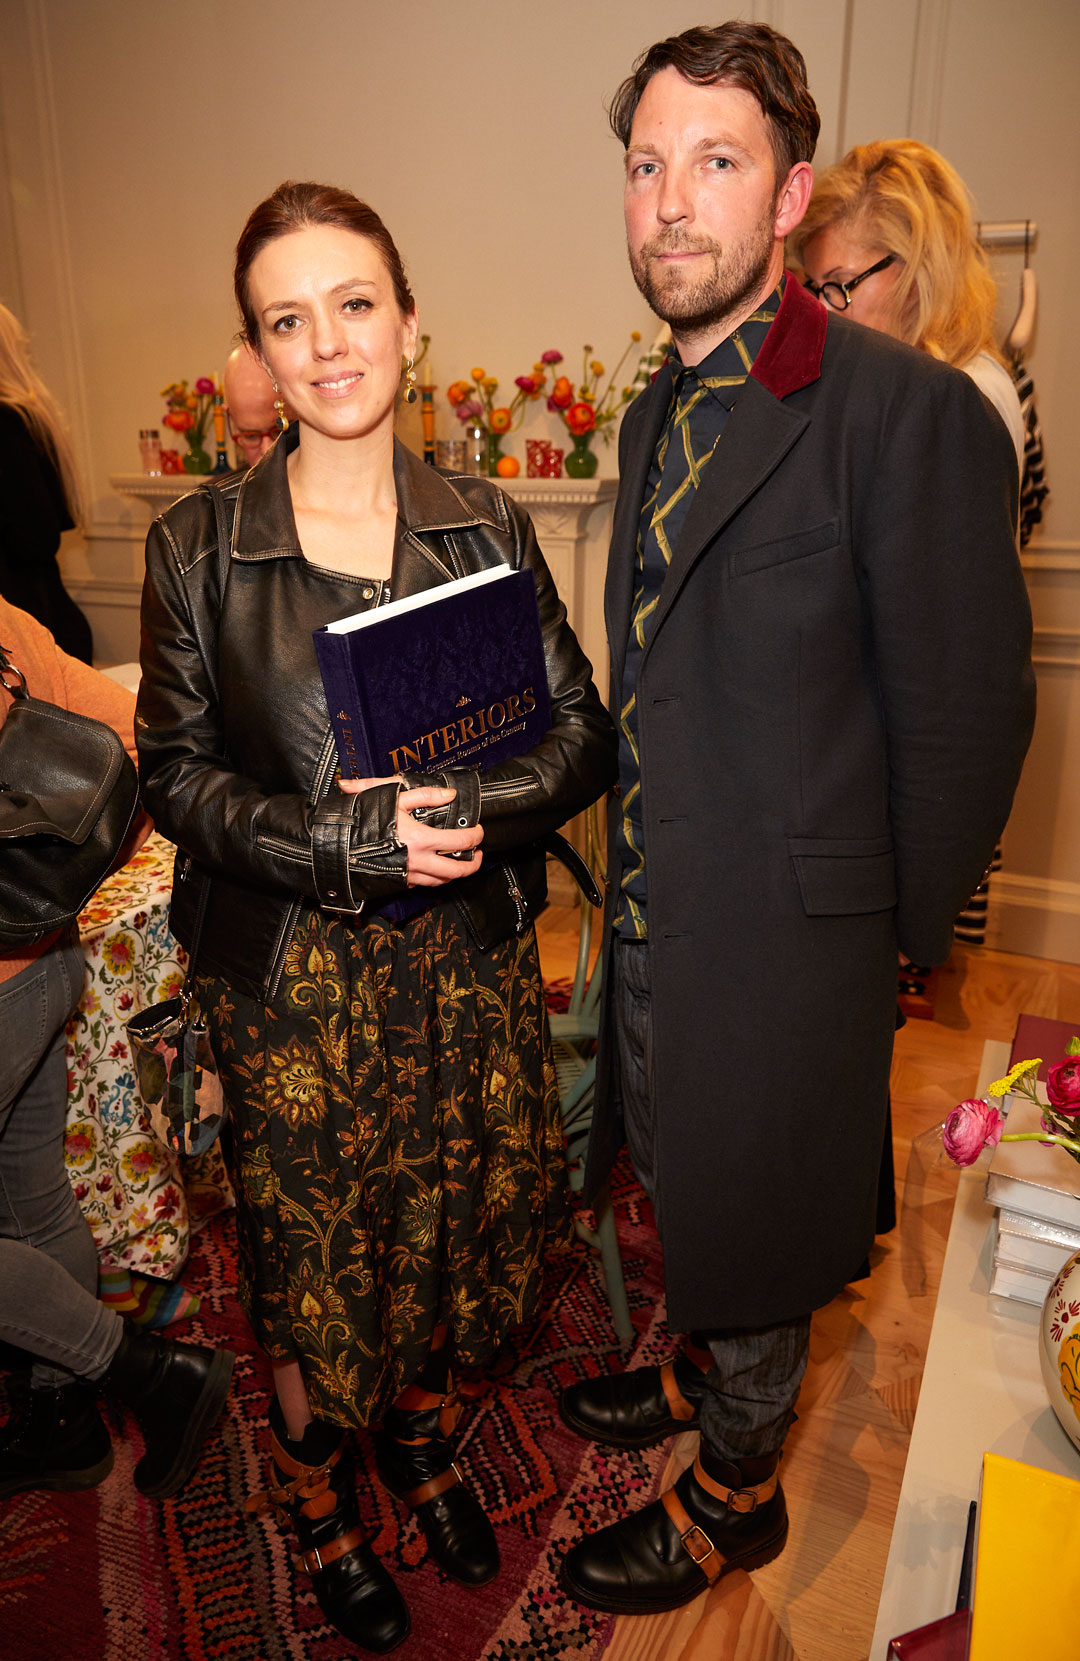 Frieda Gormley and Javvy Royle at the Interiors launch at MATCHESFASHION.COM in London